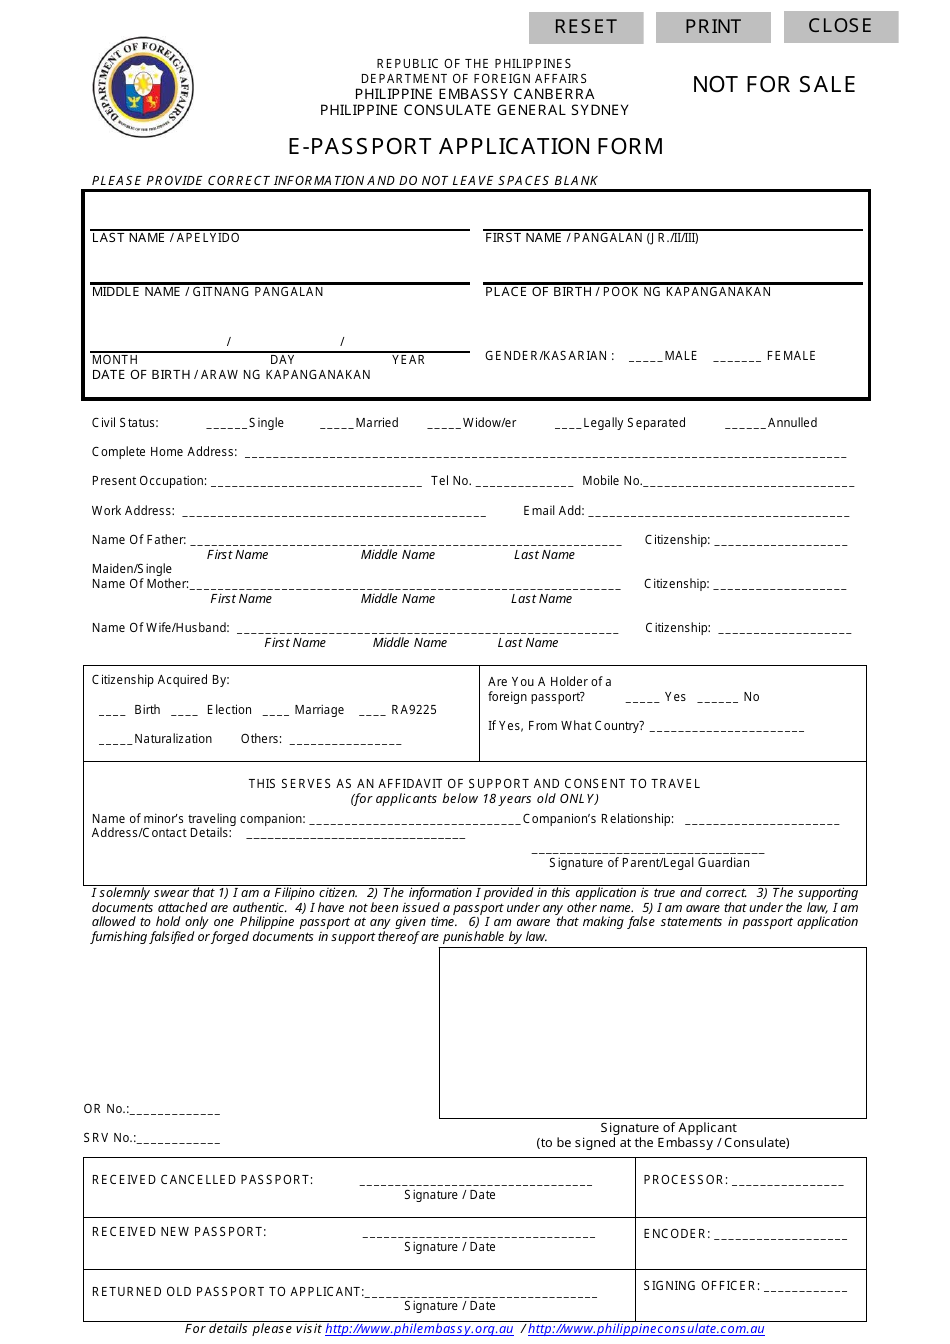 Philippine E-Passport Application Form - Philippine Embassy Canberra / Philippine Consulate General Sydney - Philippines (English / Tagalog), Page 1